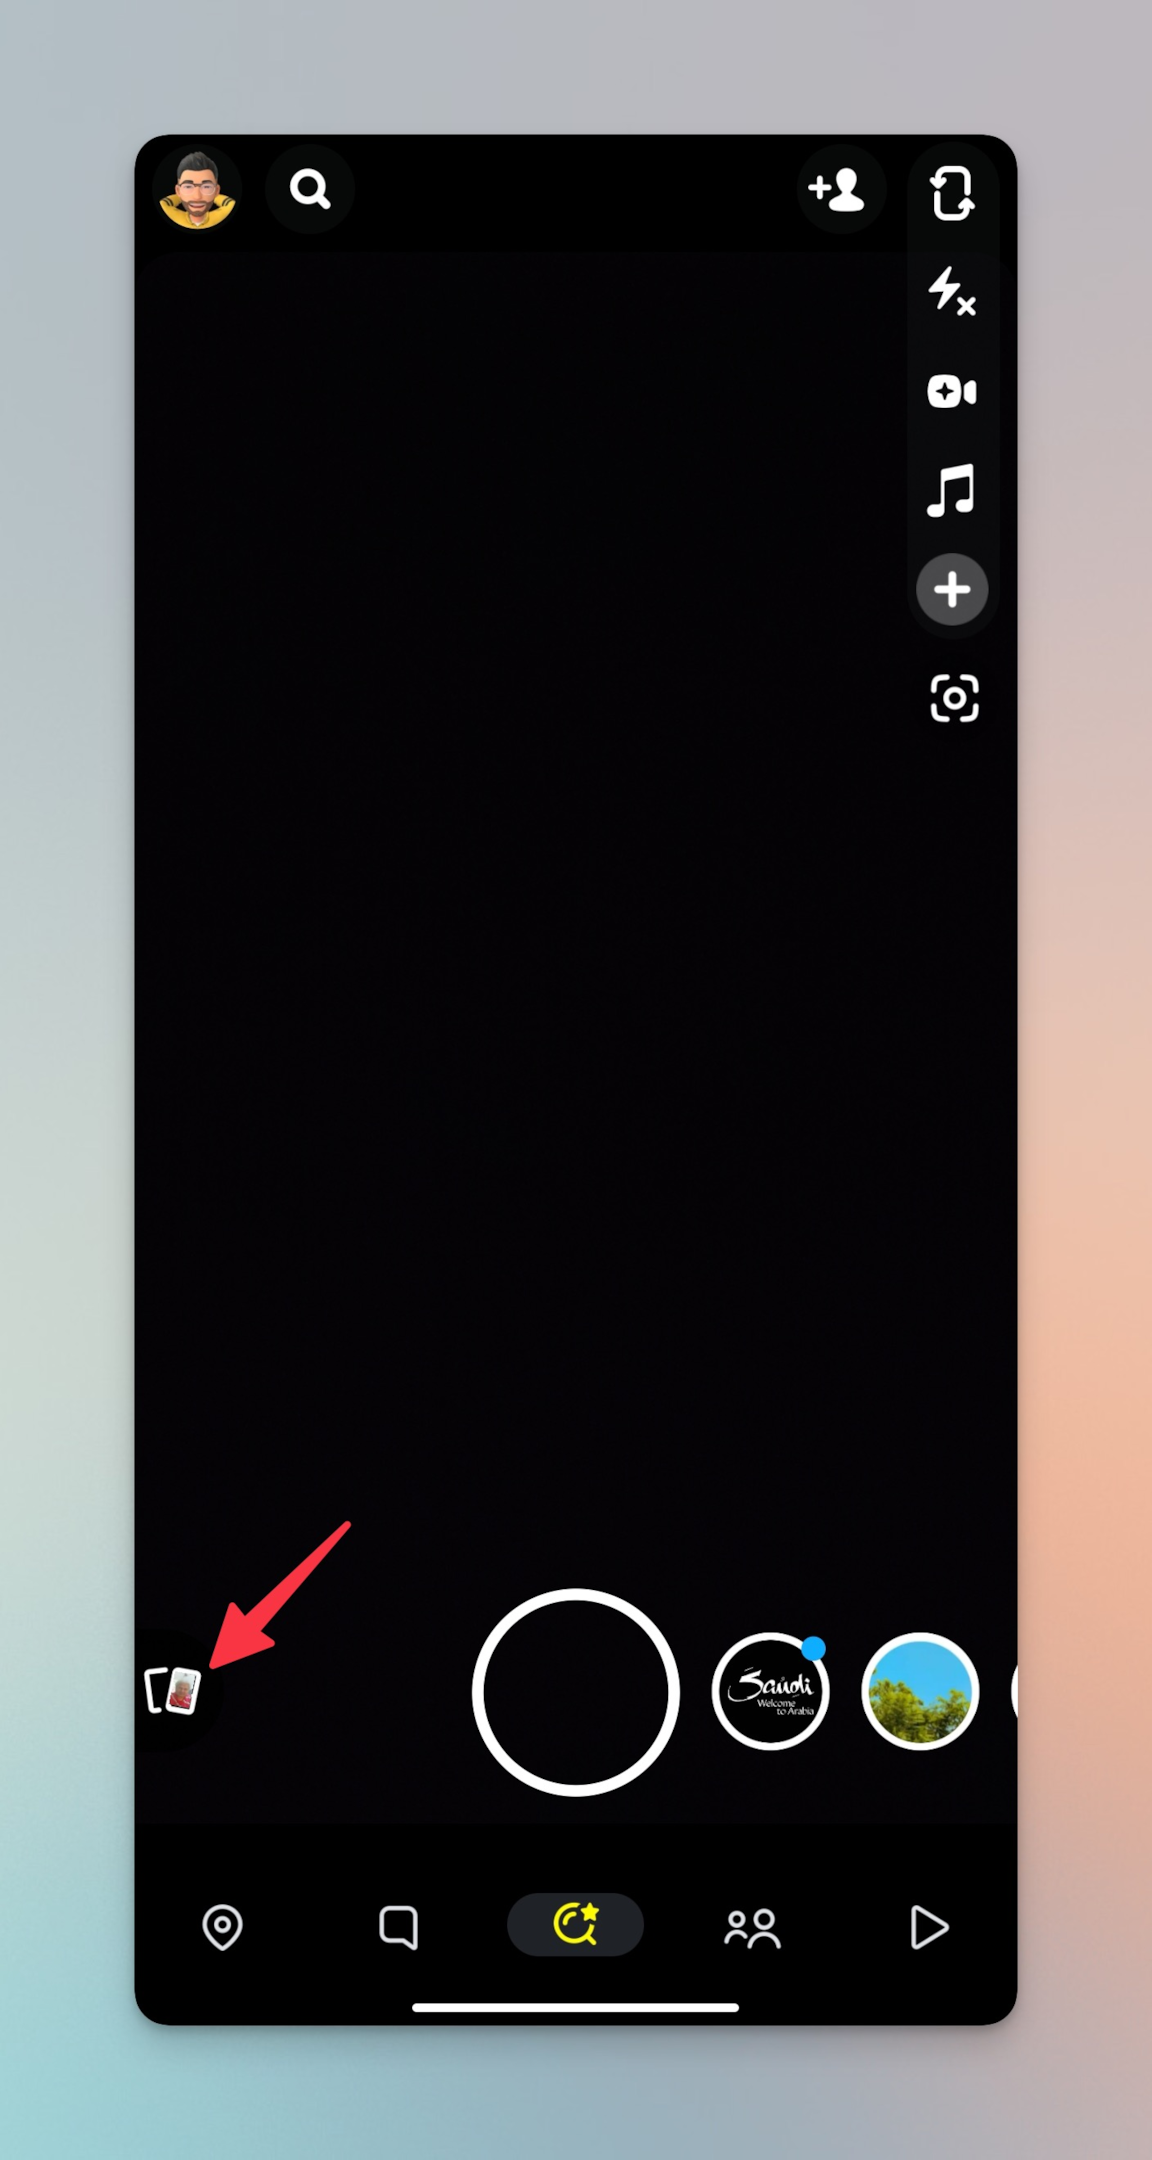 Remote.tools pointing to gallery icon (memories section) on camera screen